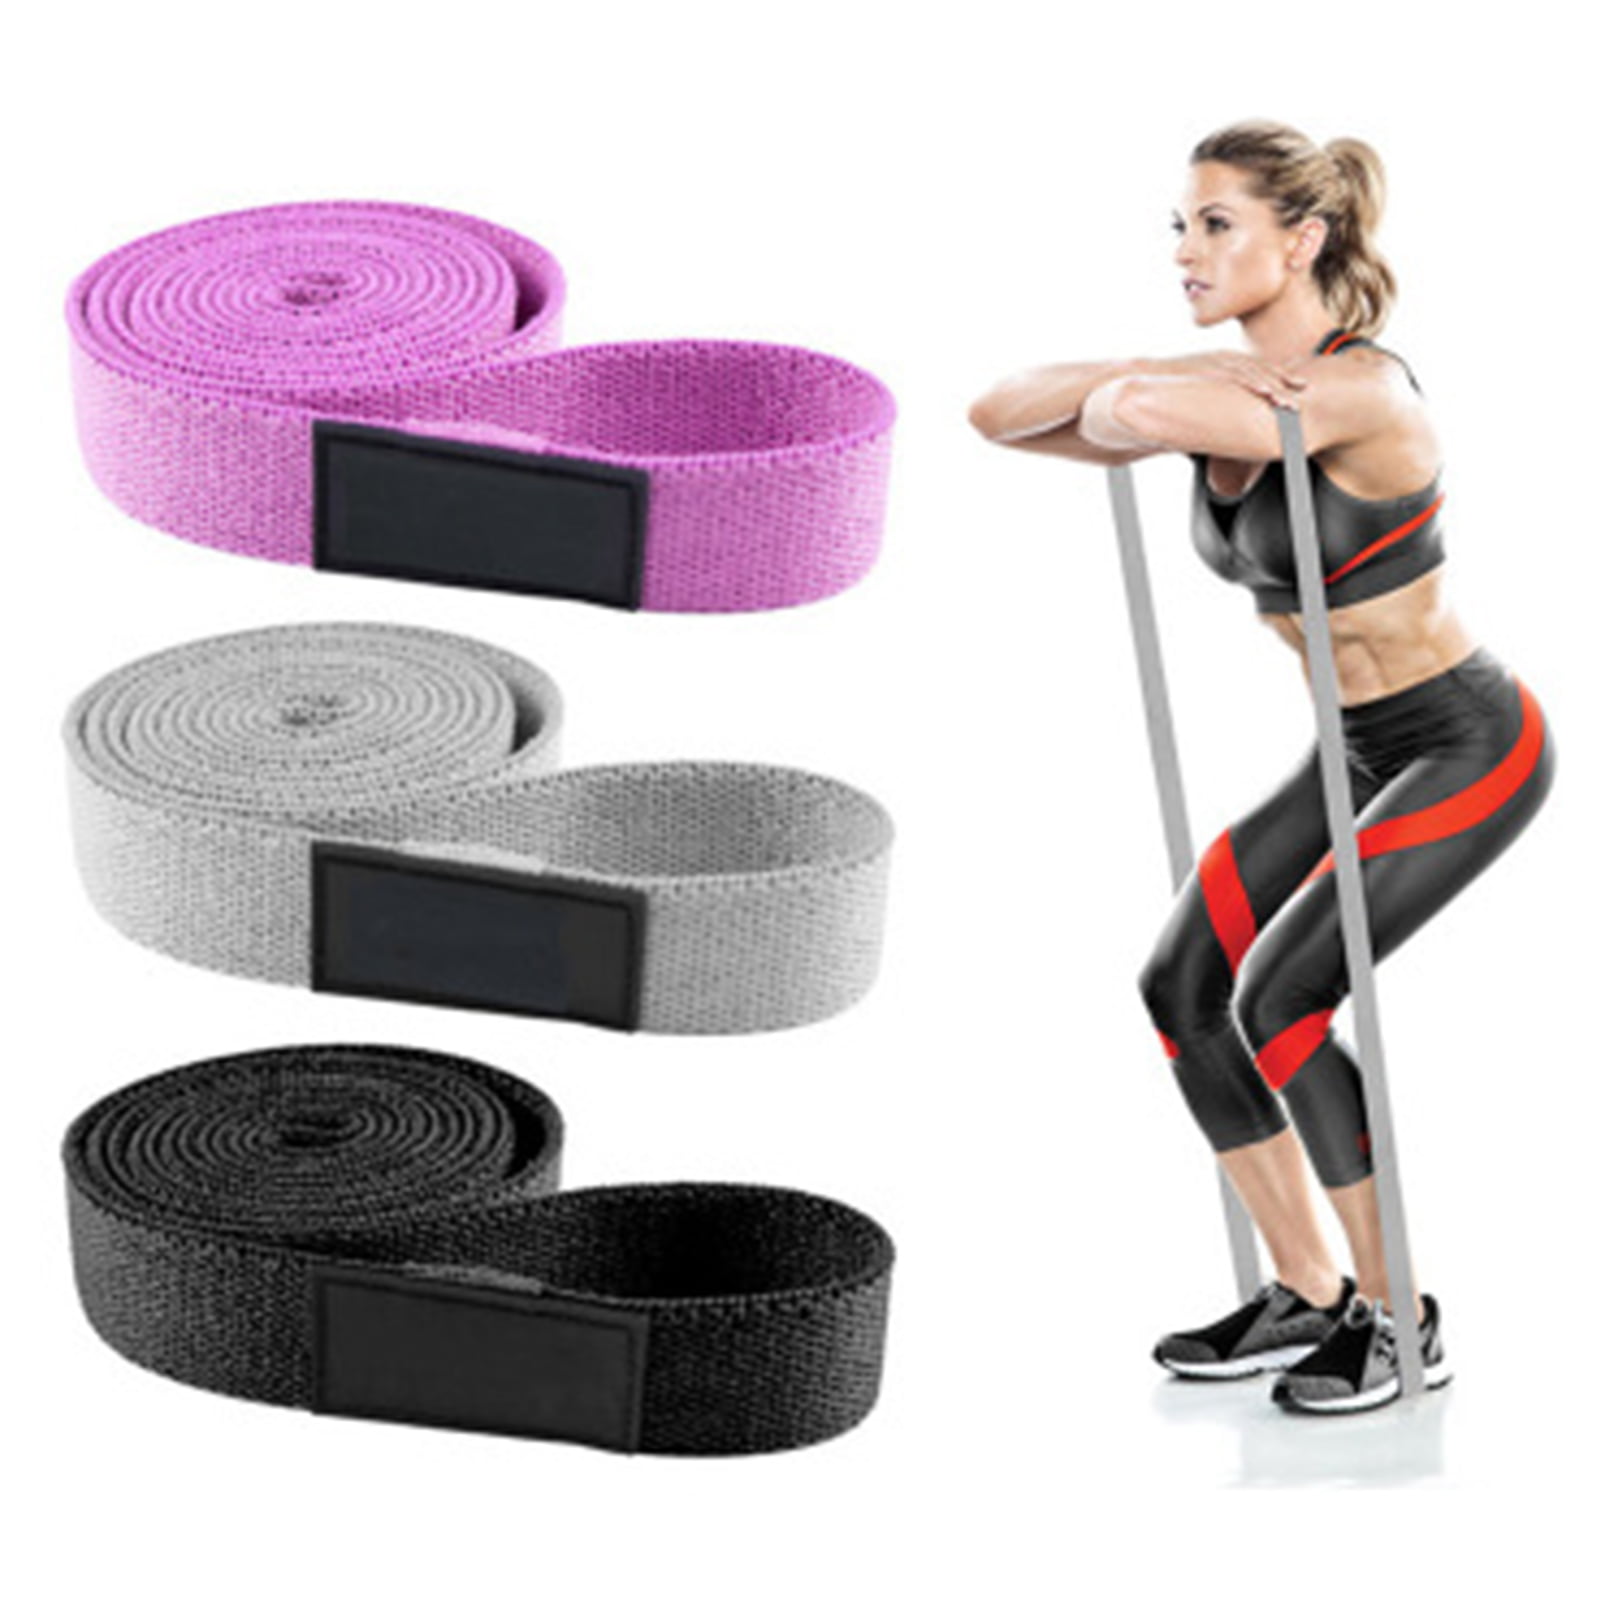 2M Men Yoga Stretch Out Strap Training Belt Tension Band Fitness Exercise Leg US 